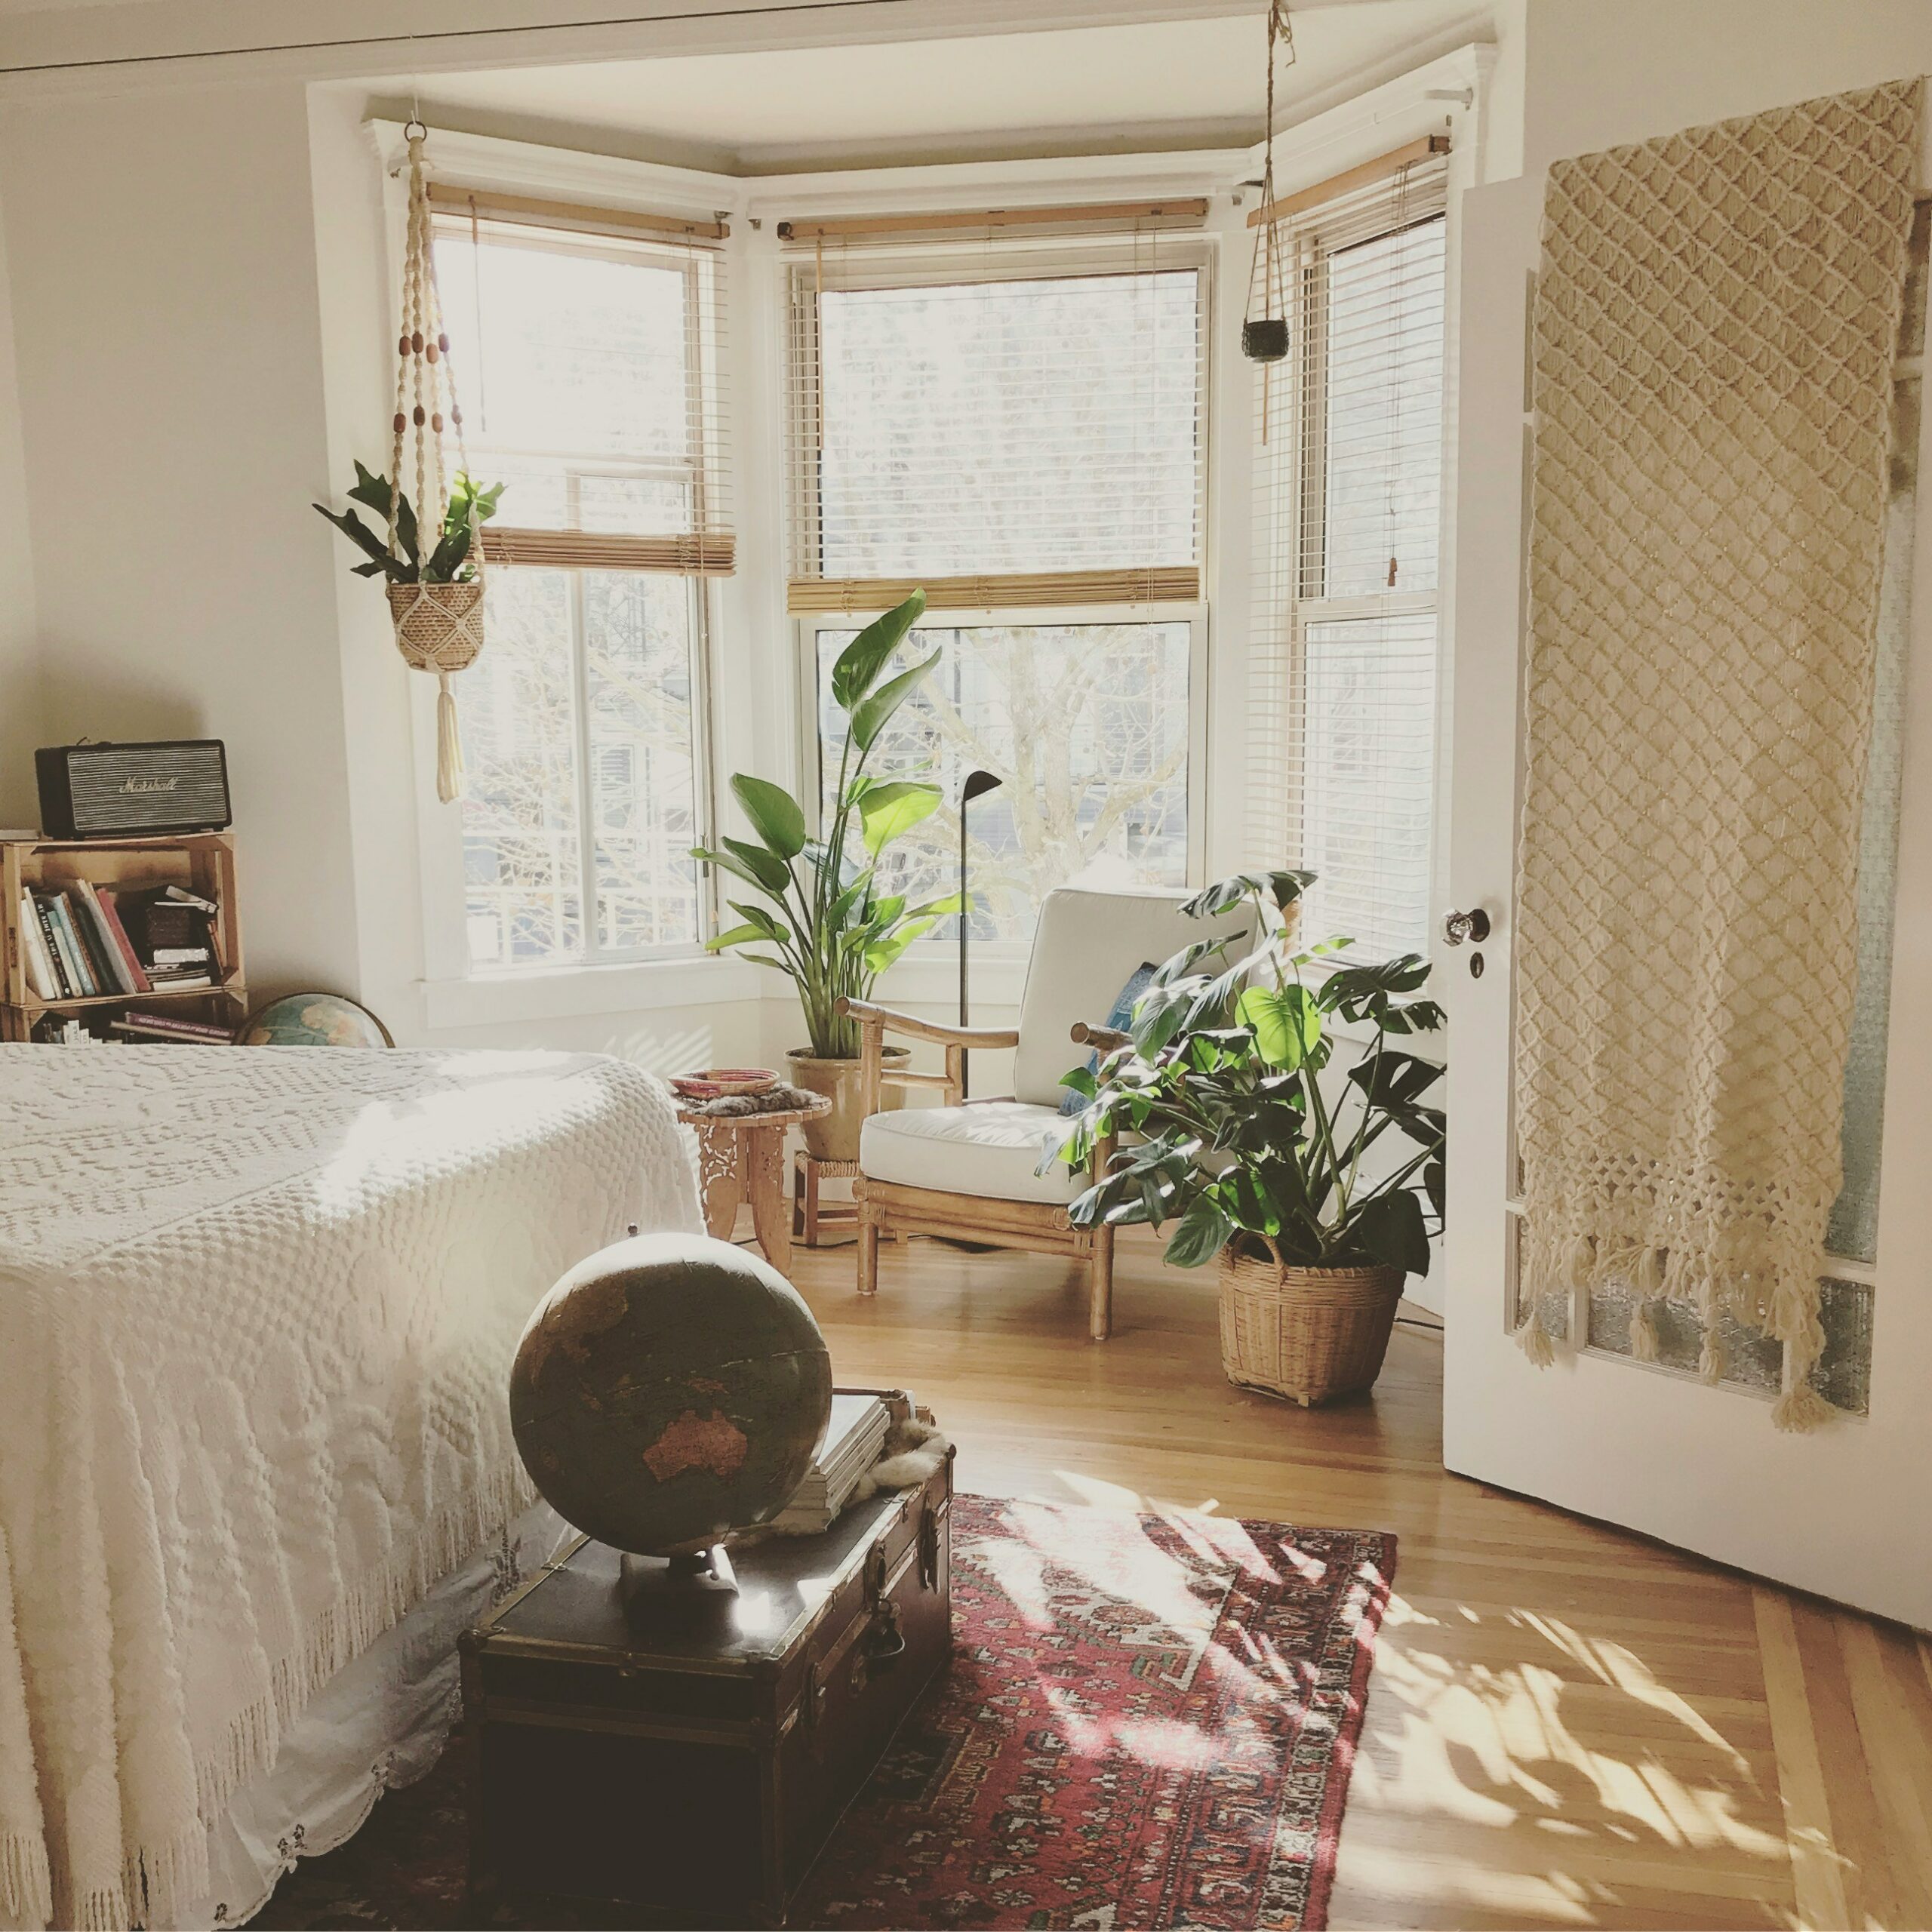 Bedroom with plants, a rug, a wooden chair, and wooden blinds lifted up allowing sun to enter